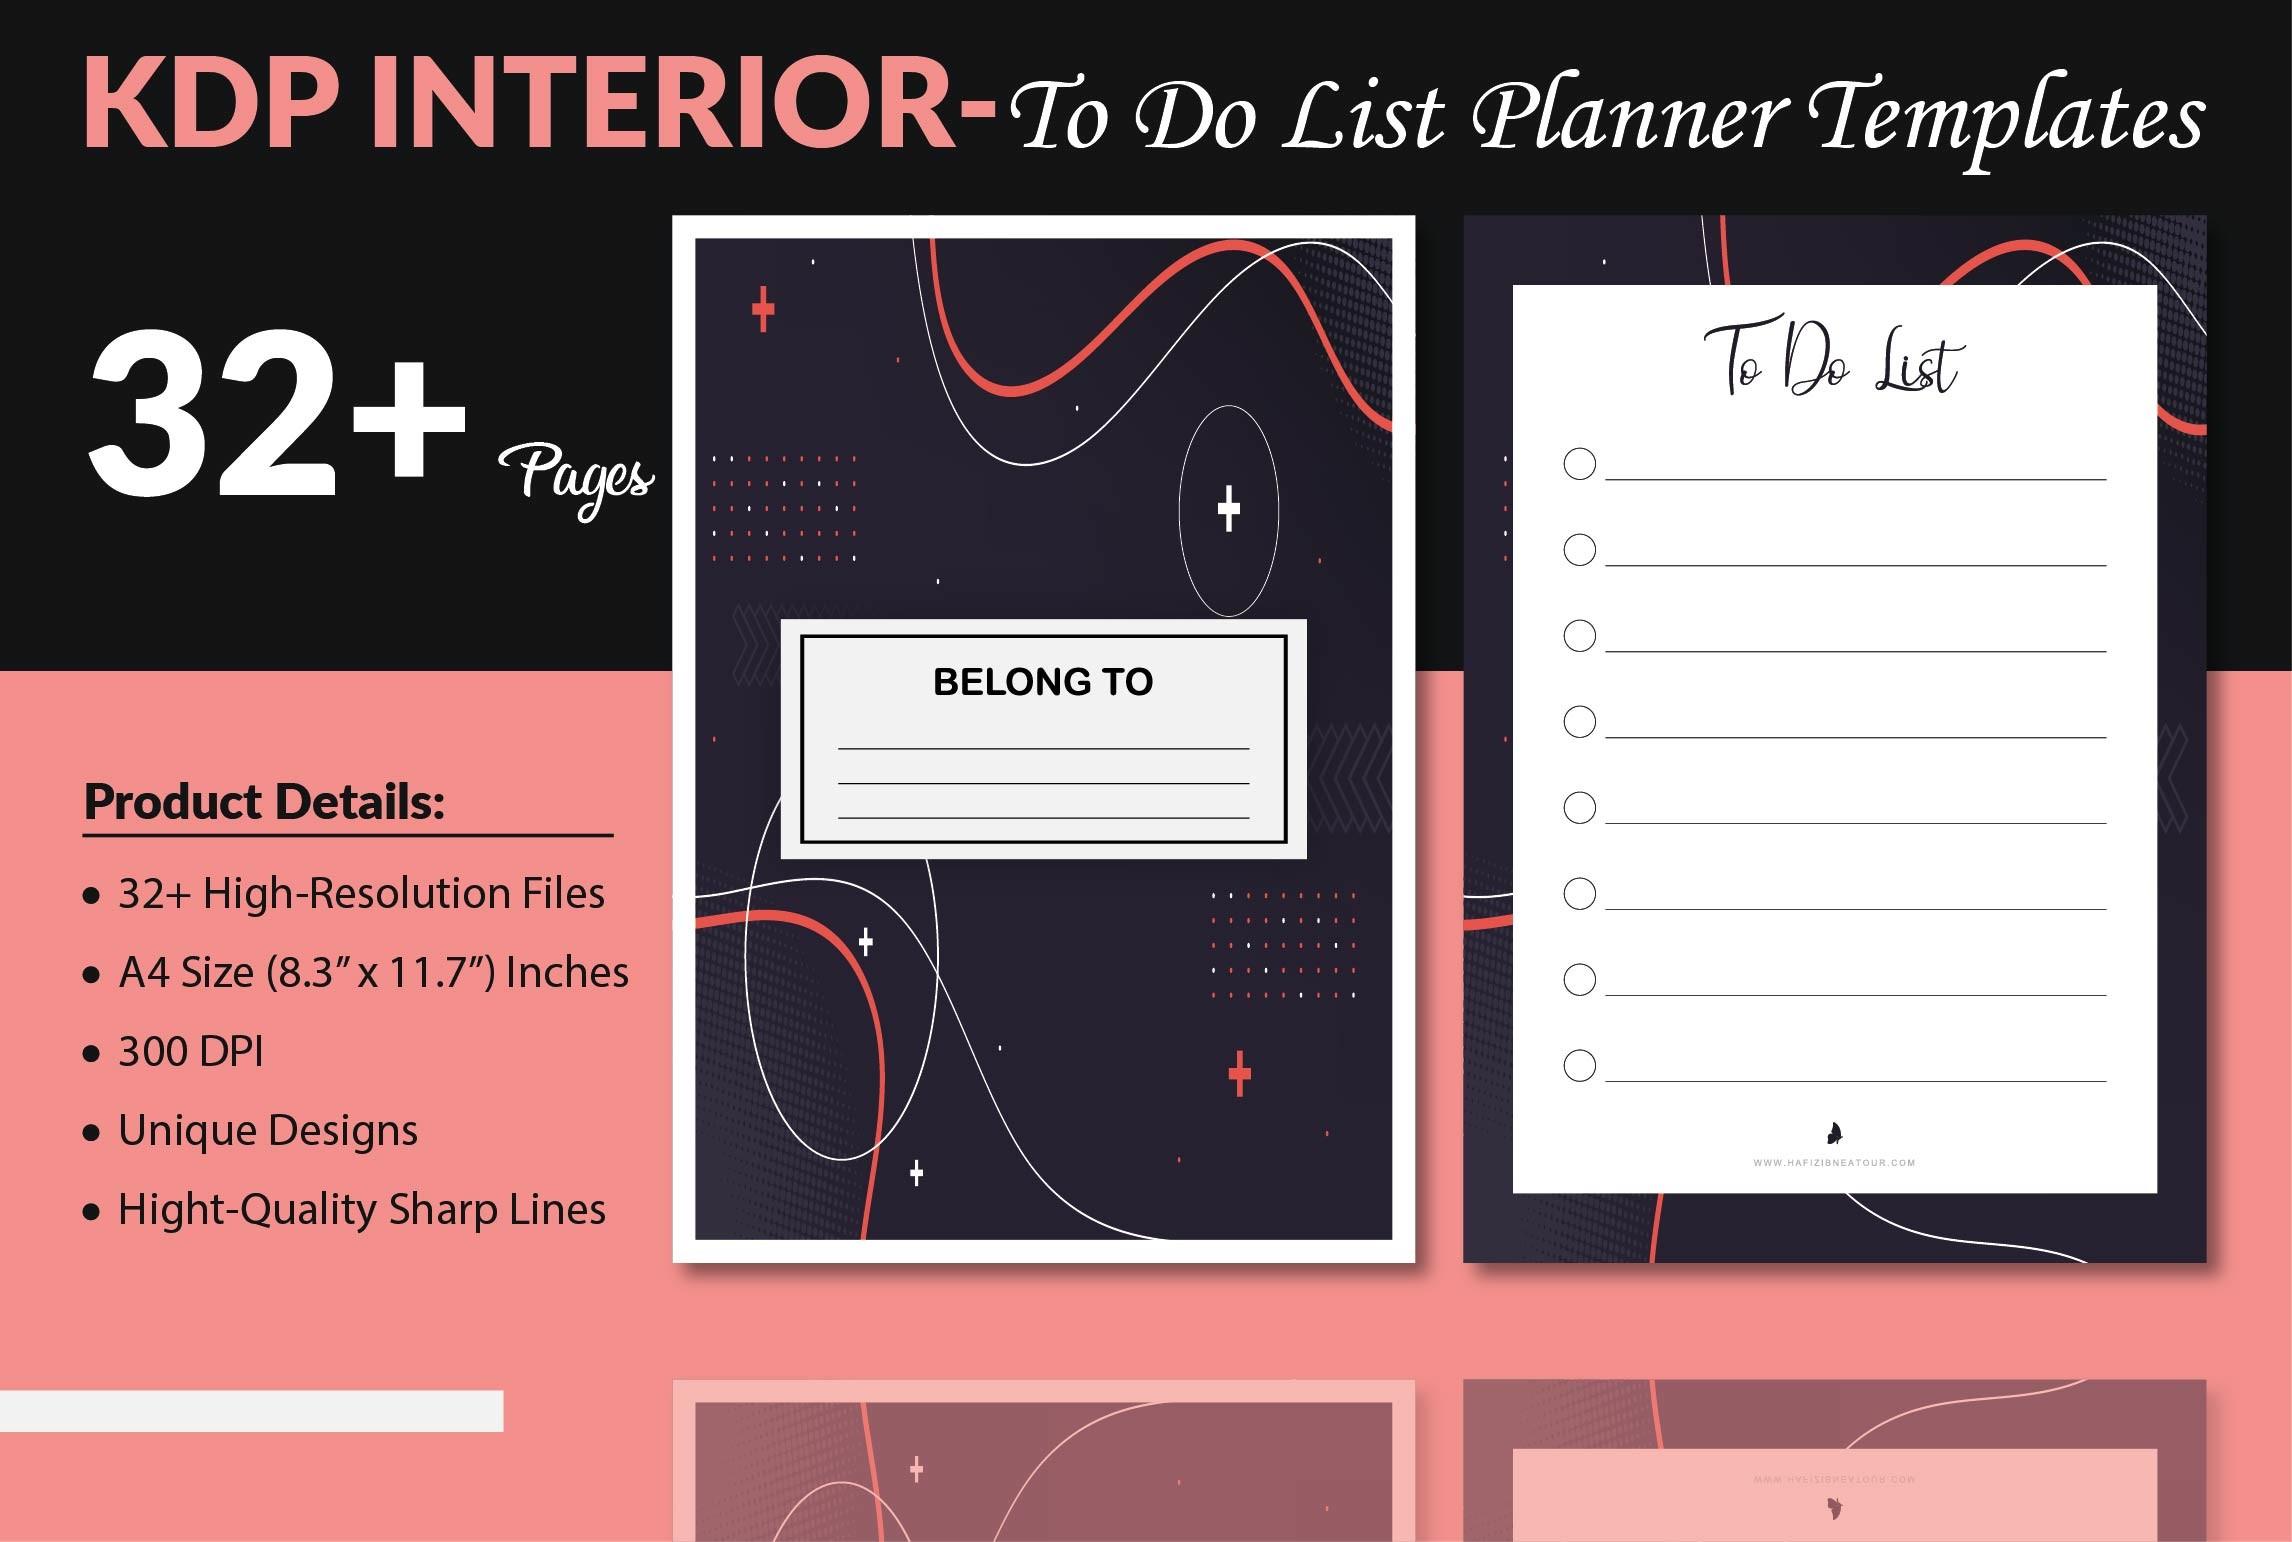 To-Do List Planner Templates - KDP